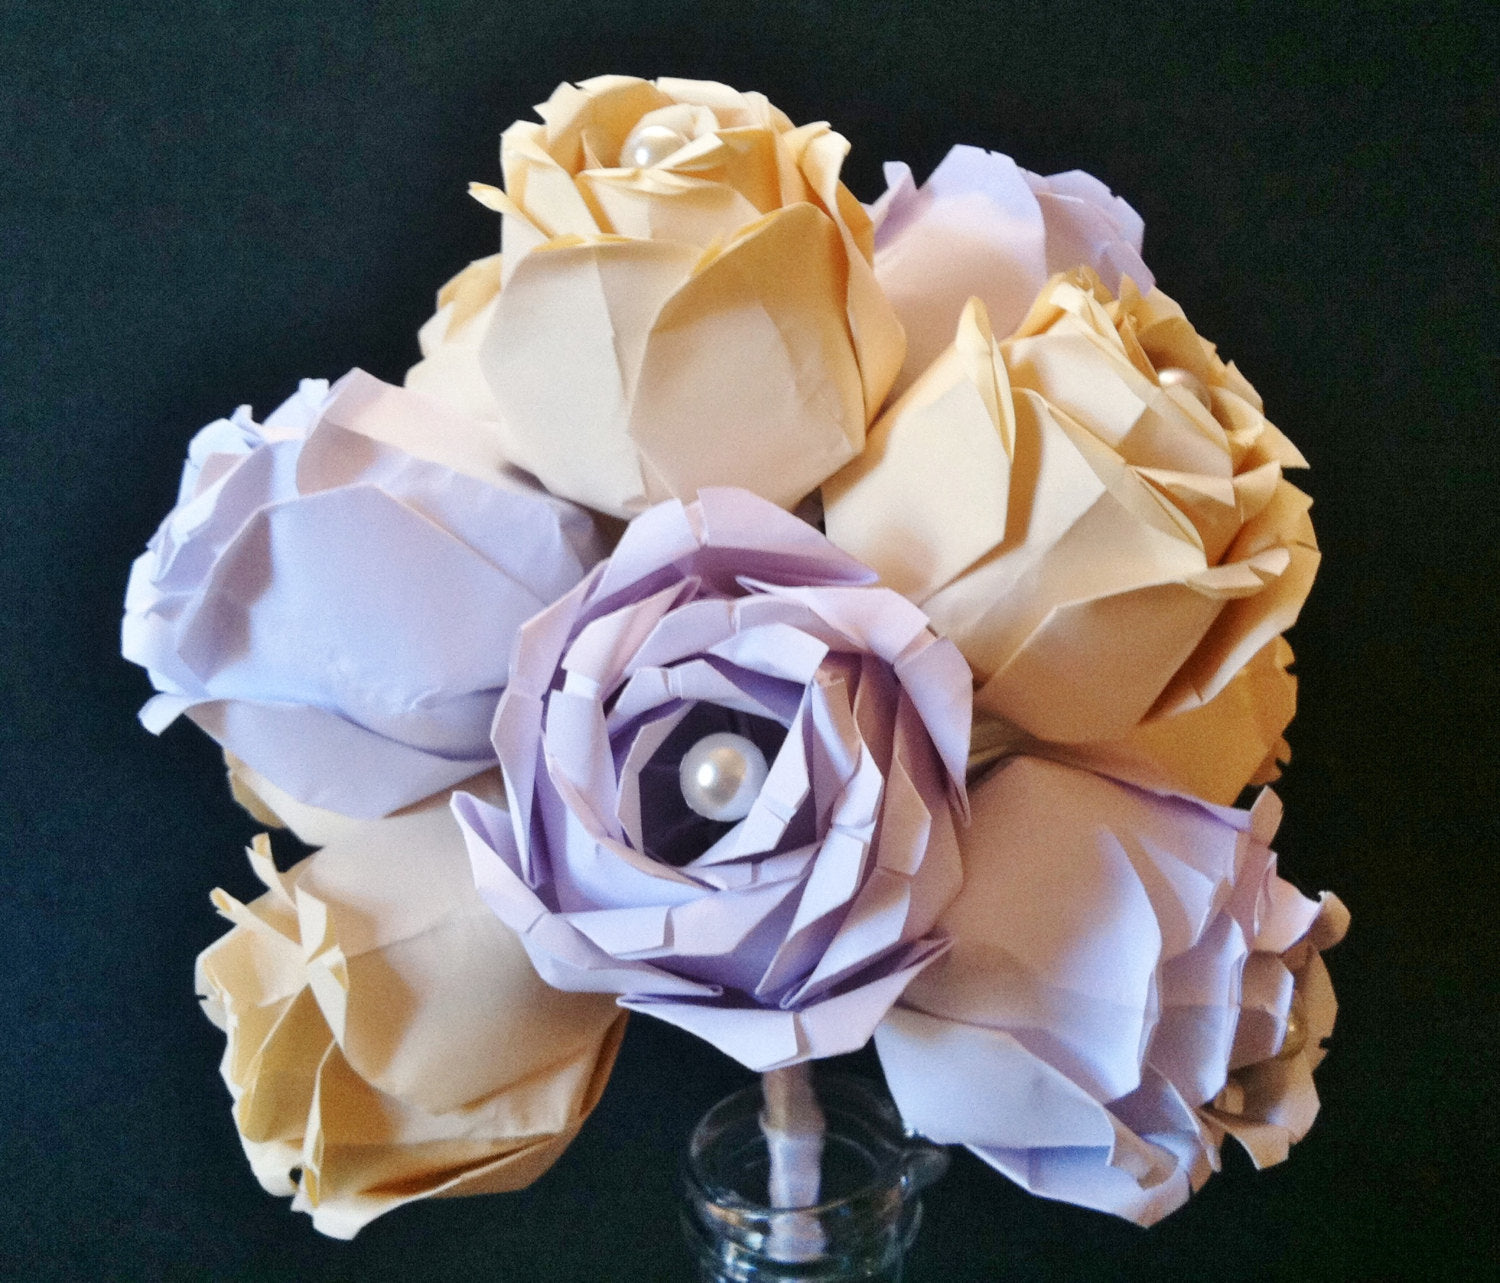 Dried Flowers Forever - Bouquets, Gifts, Wedding, Home Decor